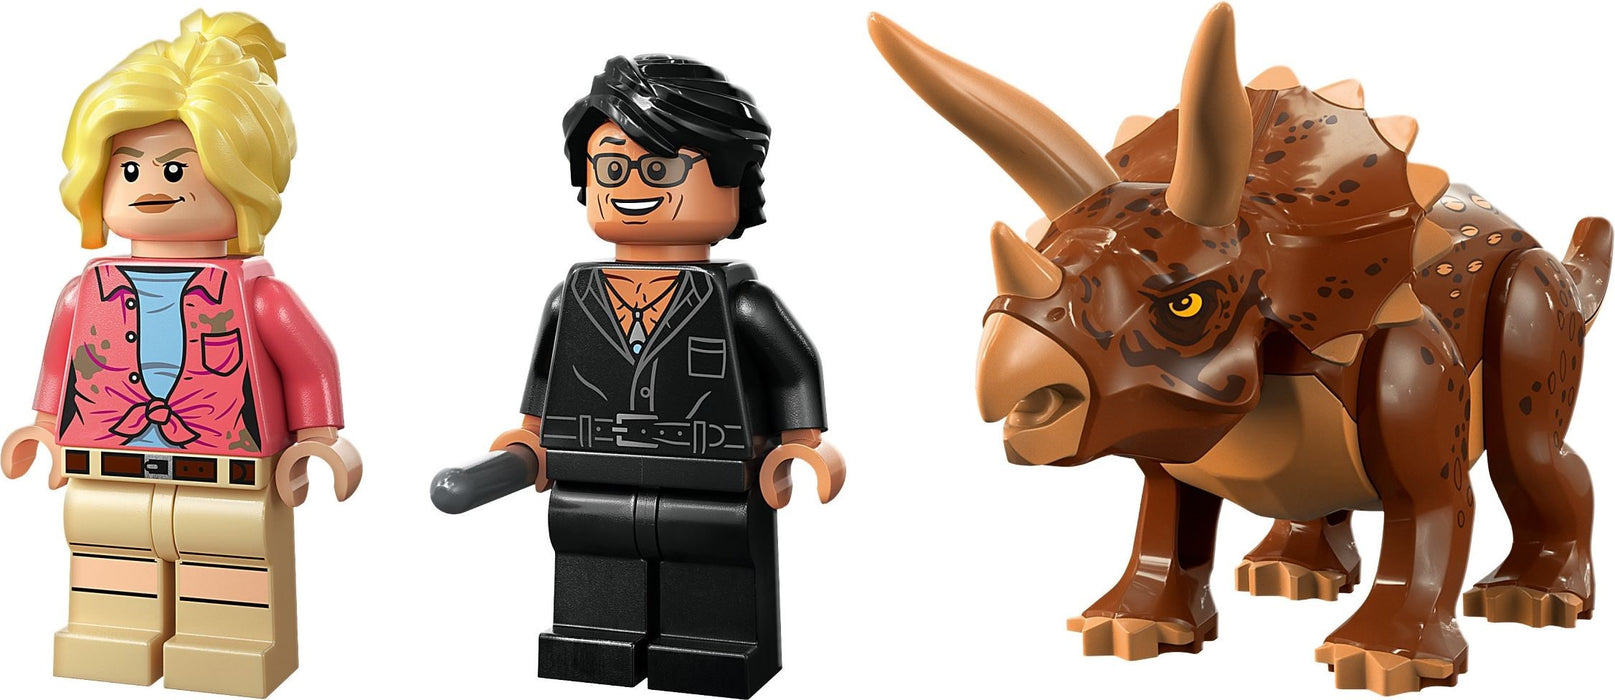 LEGO Jurassic World 76959 Triceratops Research